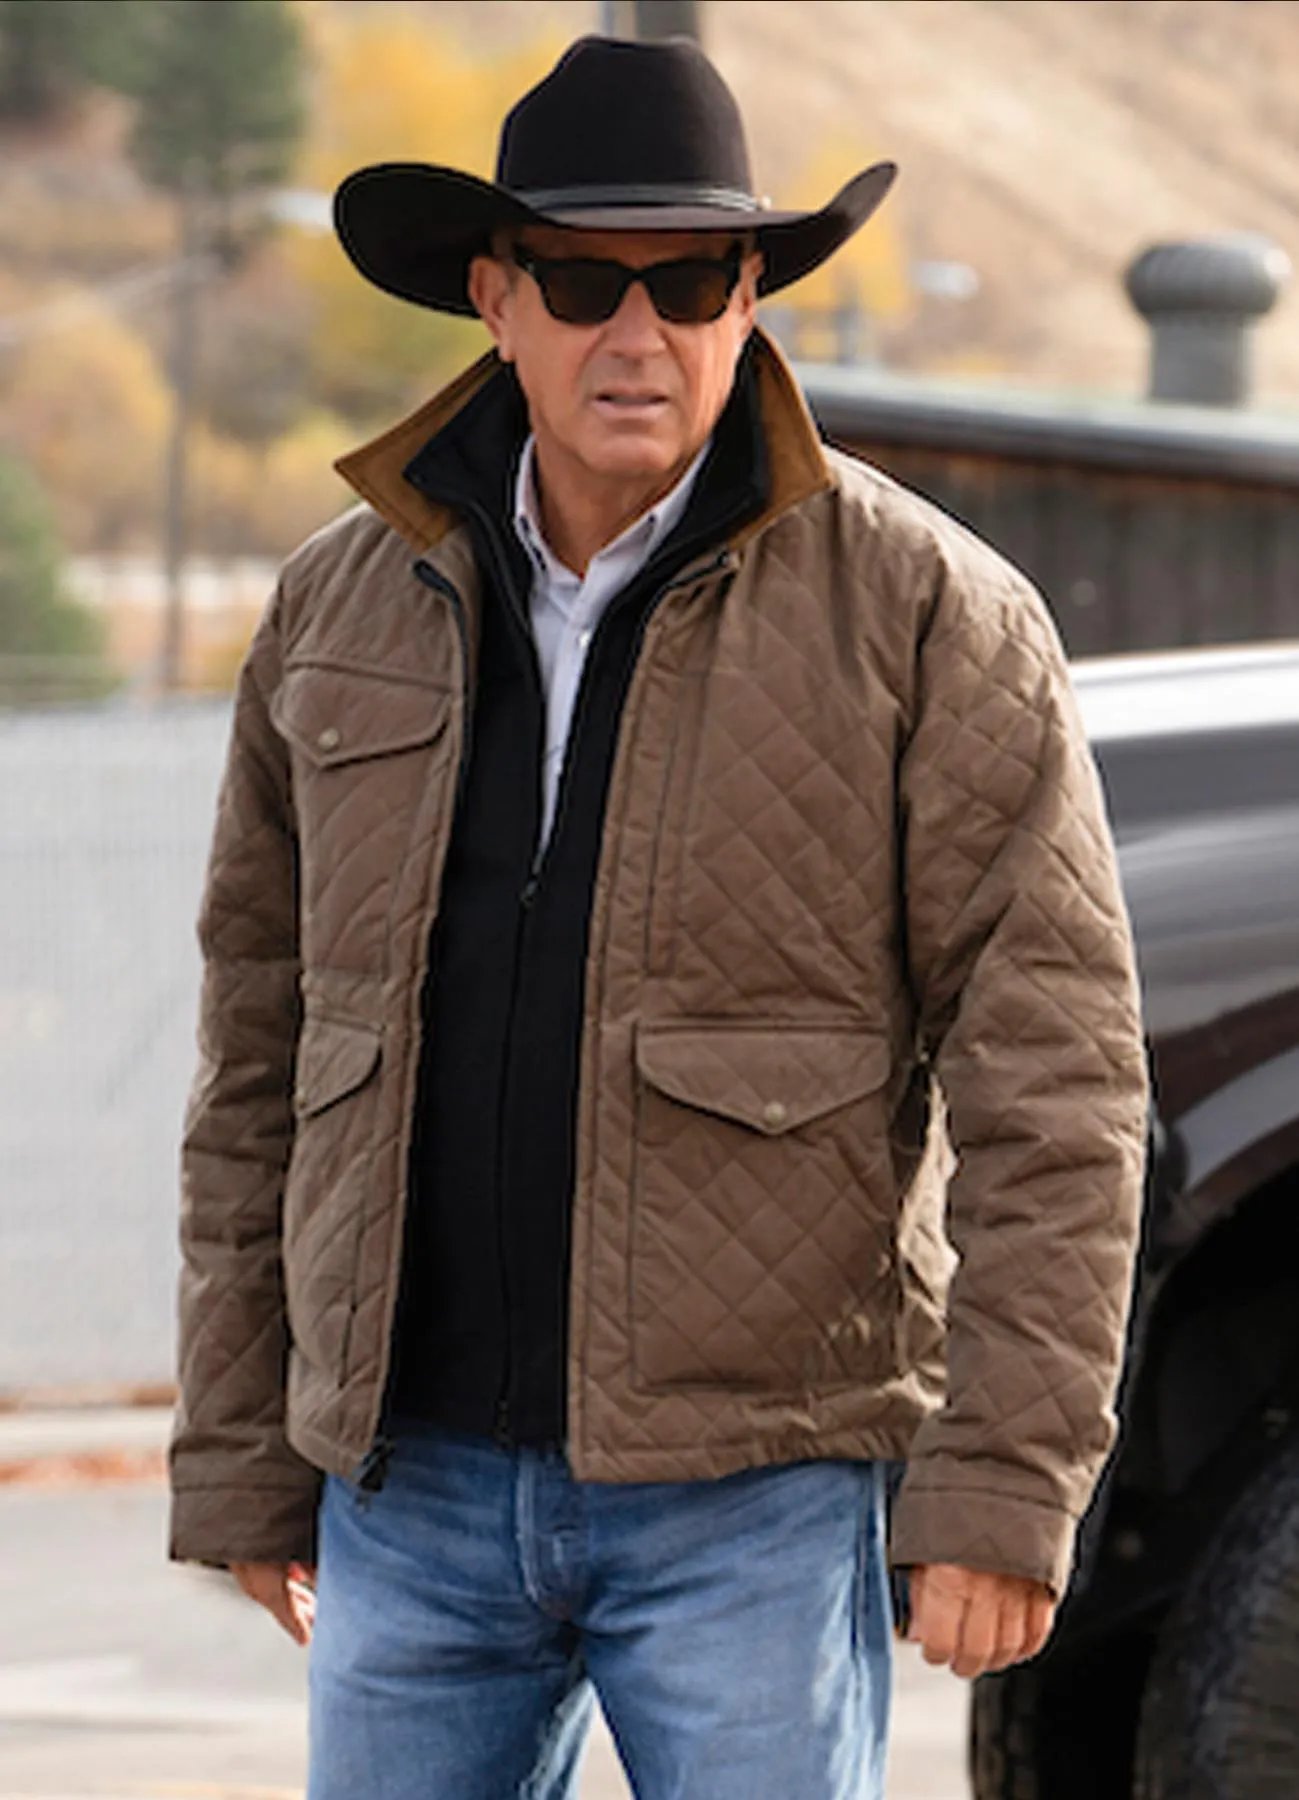 Kevin Costner Yellowstone John Dutton Quilted Jacket